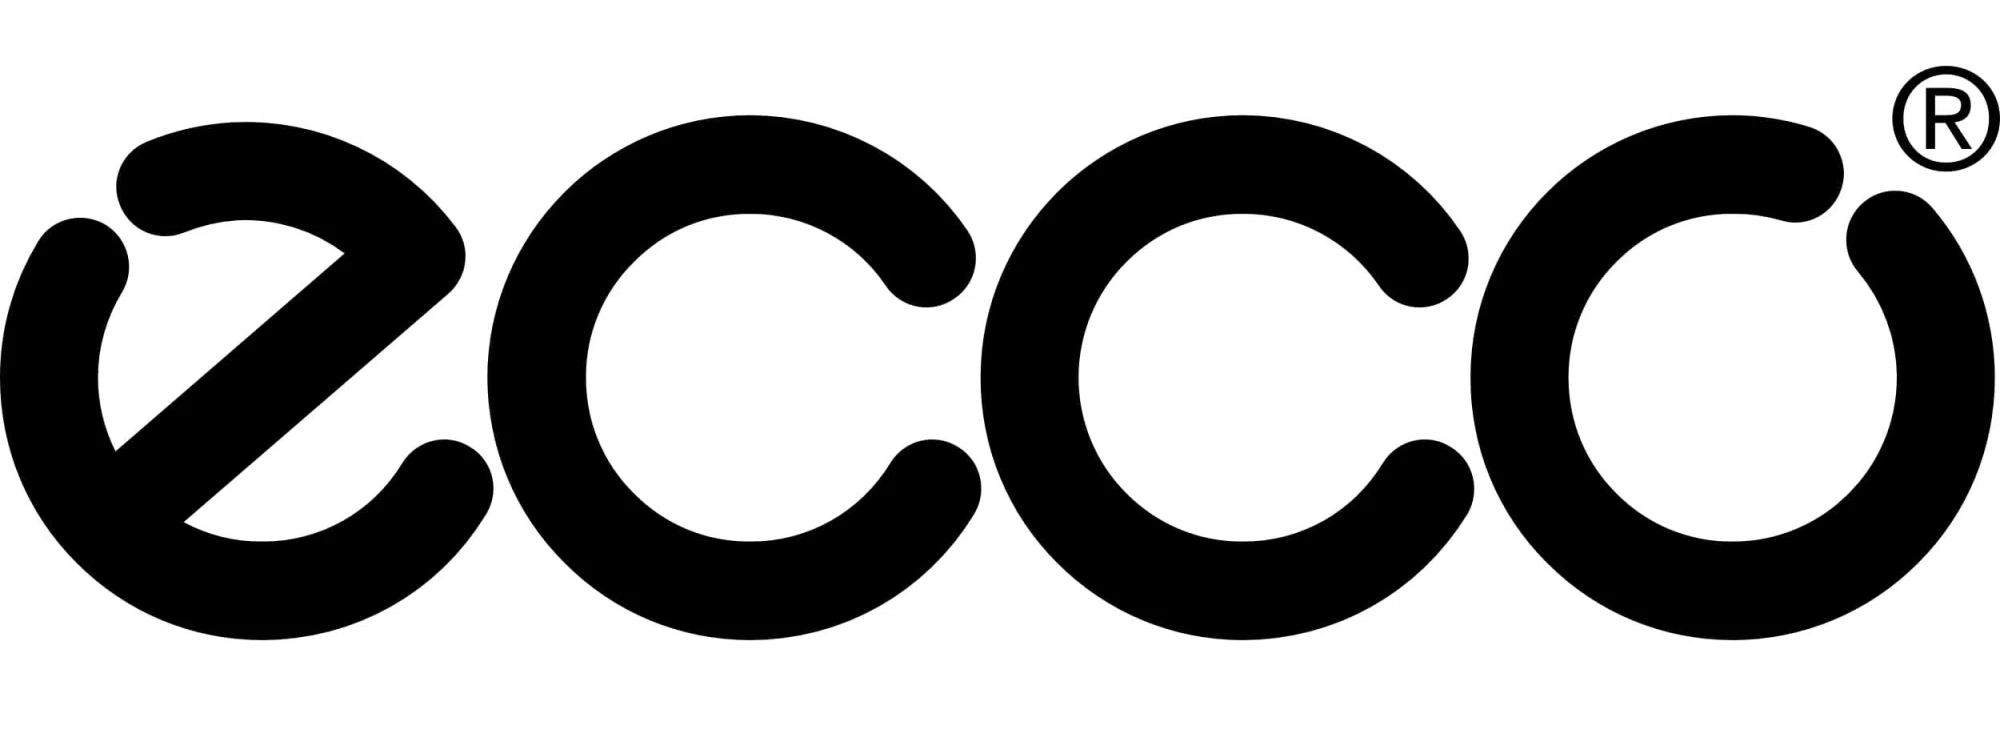 Official ECCO® Online Shoe Shop – Quality Footwear & Leather Bags